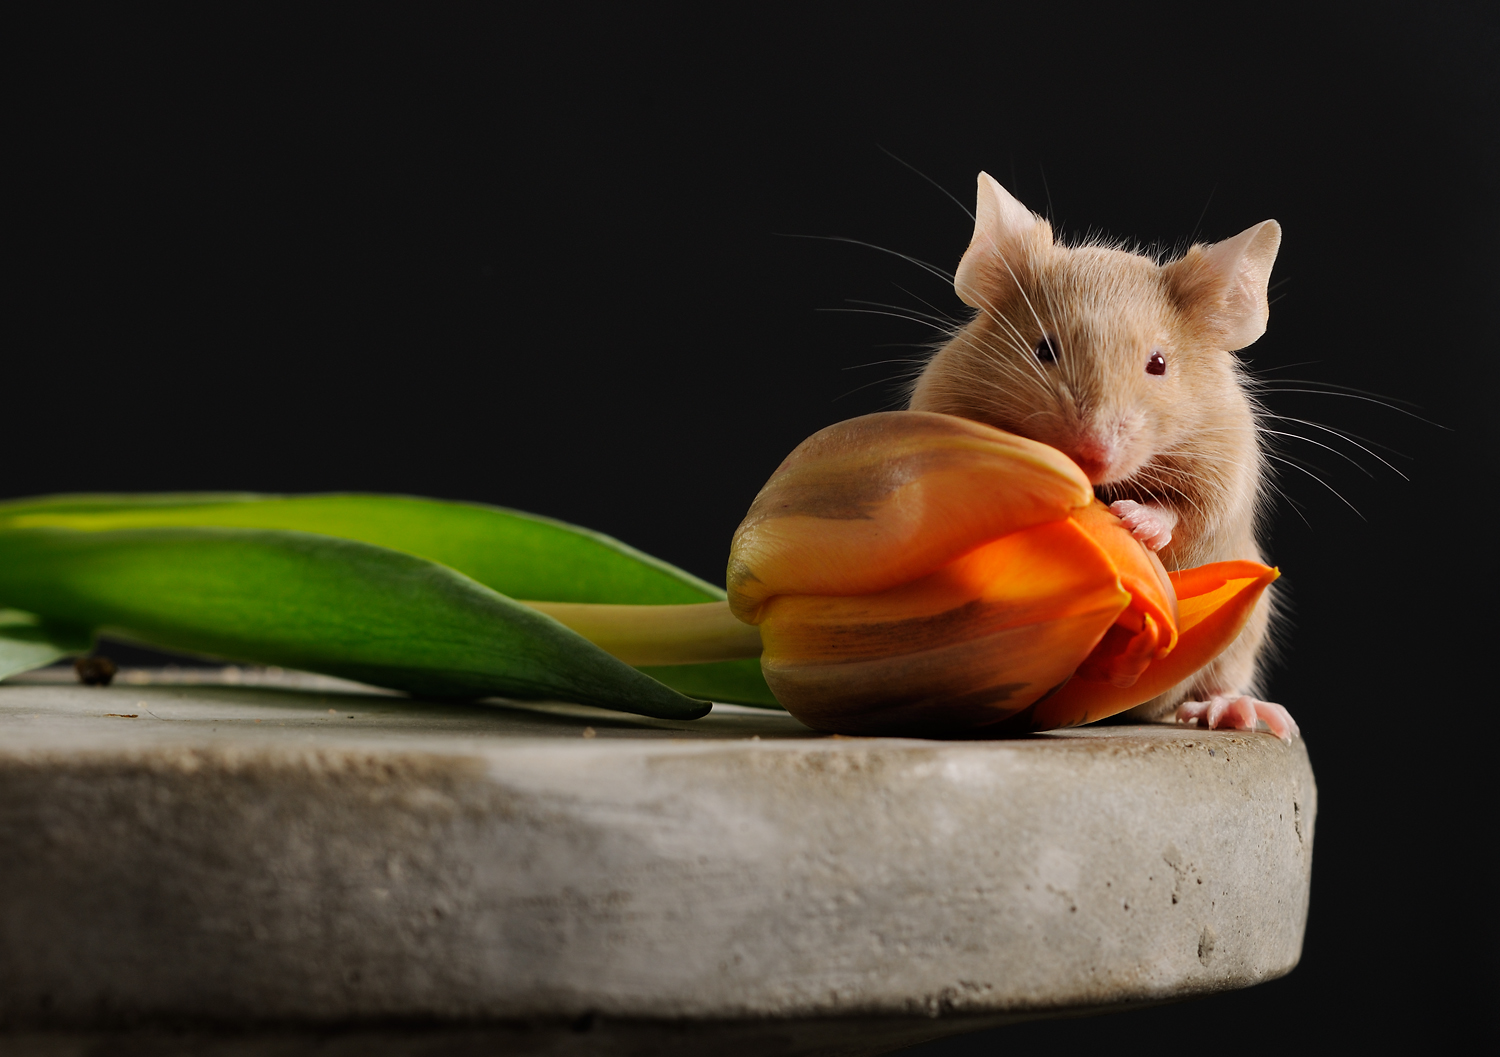   With a little patience, a mouse will pose - the tulip represents&nbsp;the Dutch company that breeds special mice  